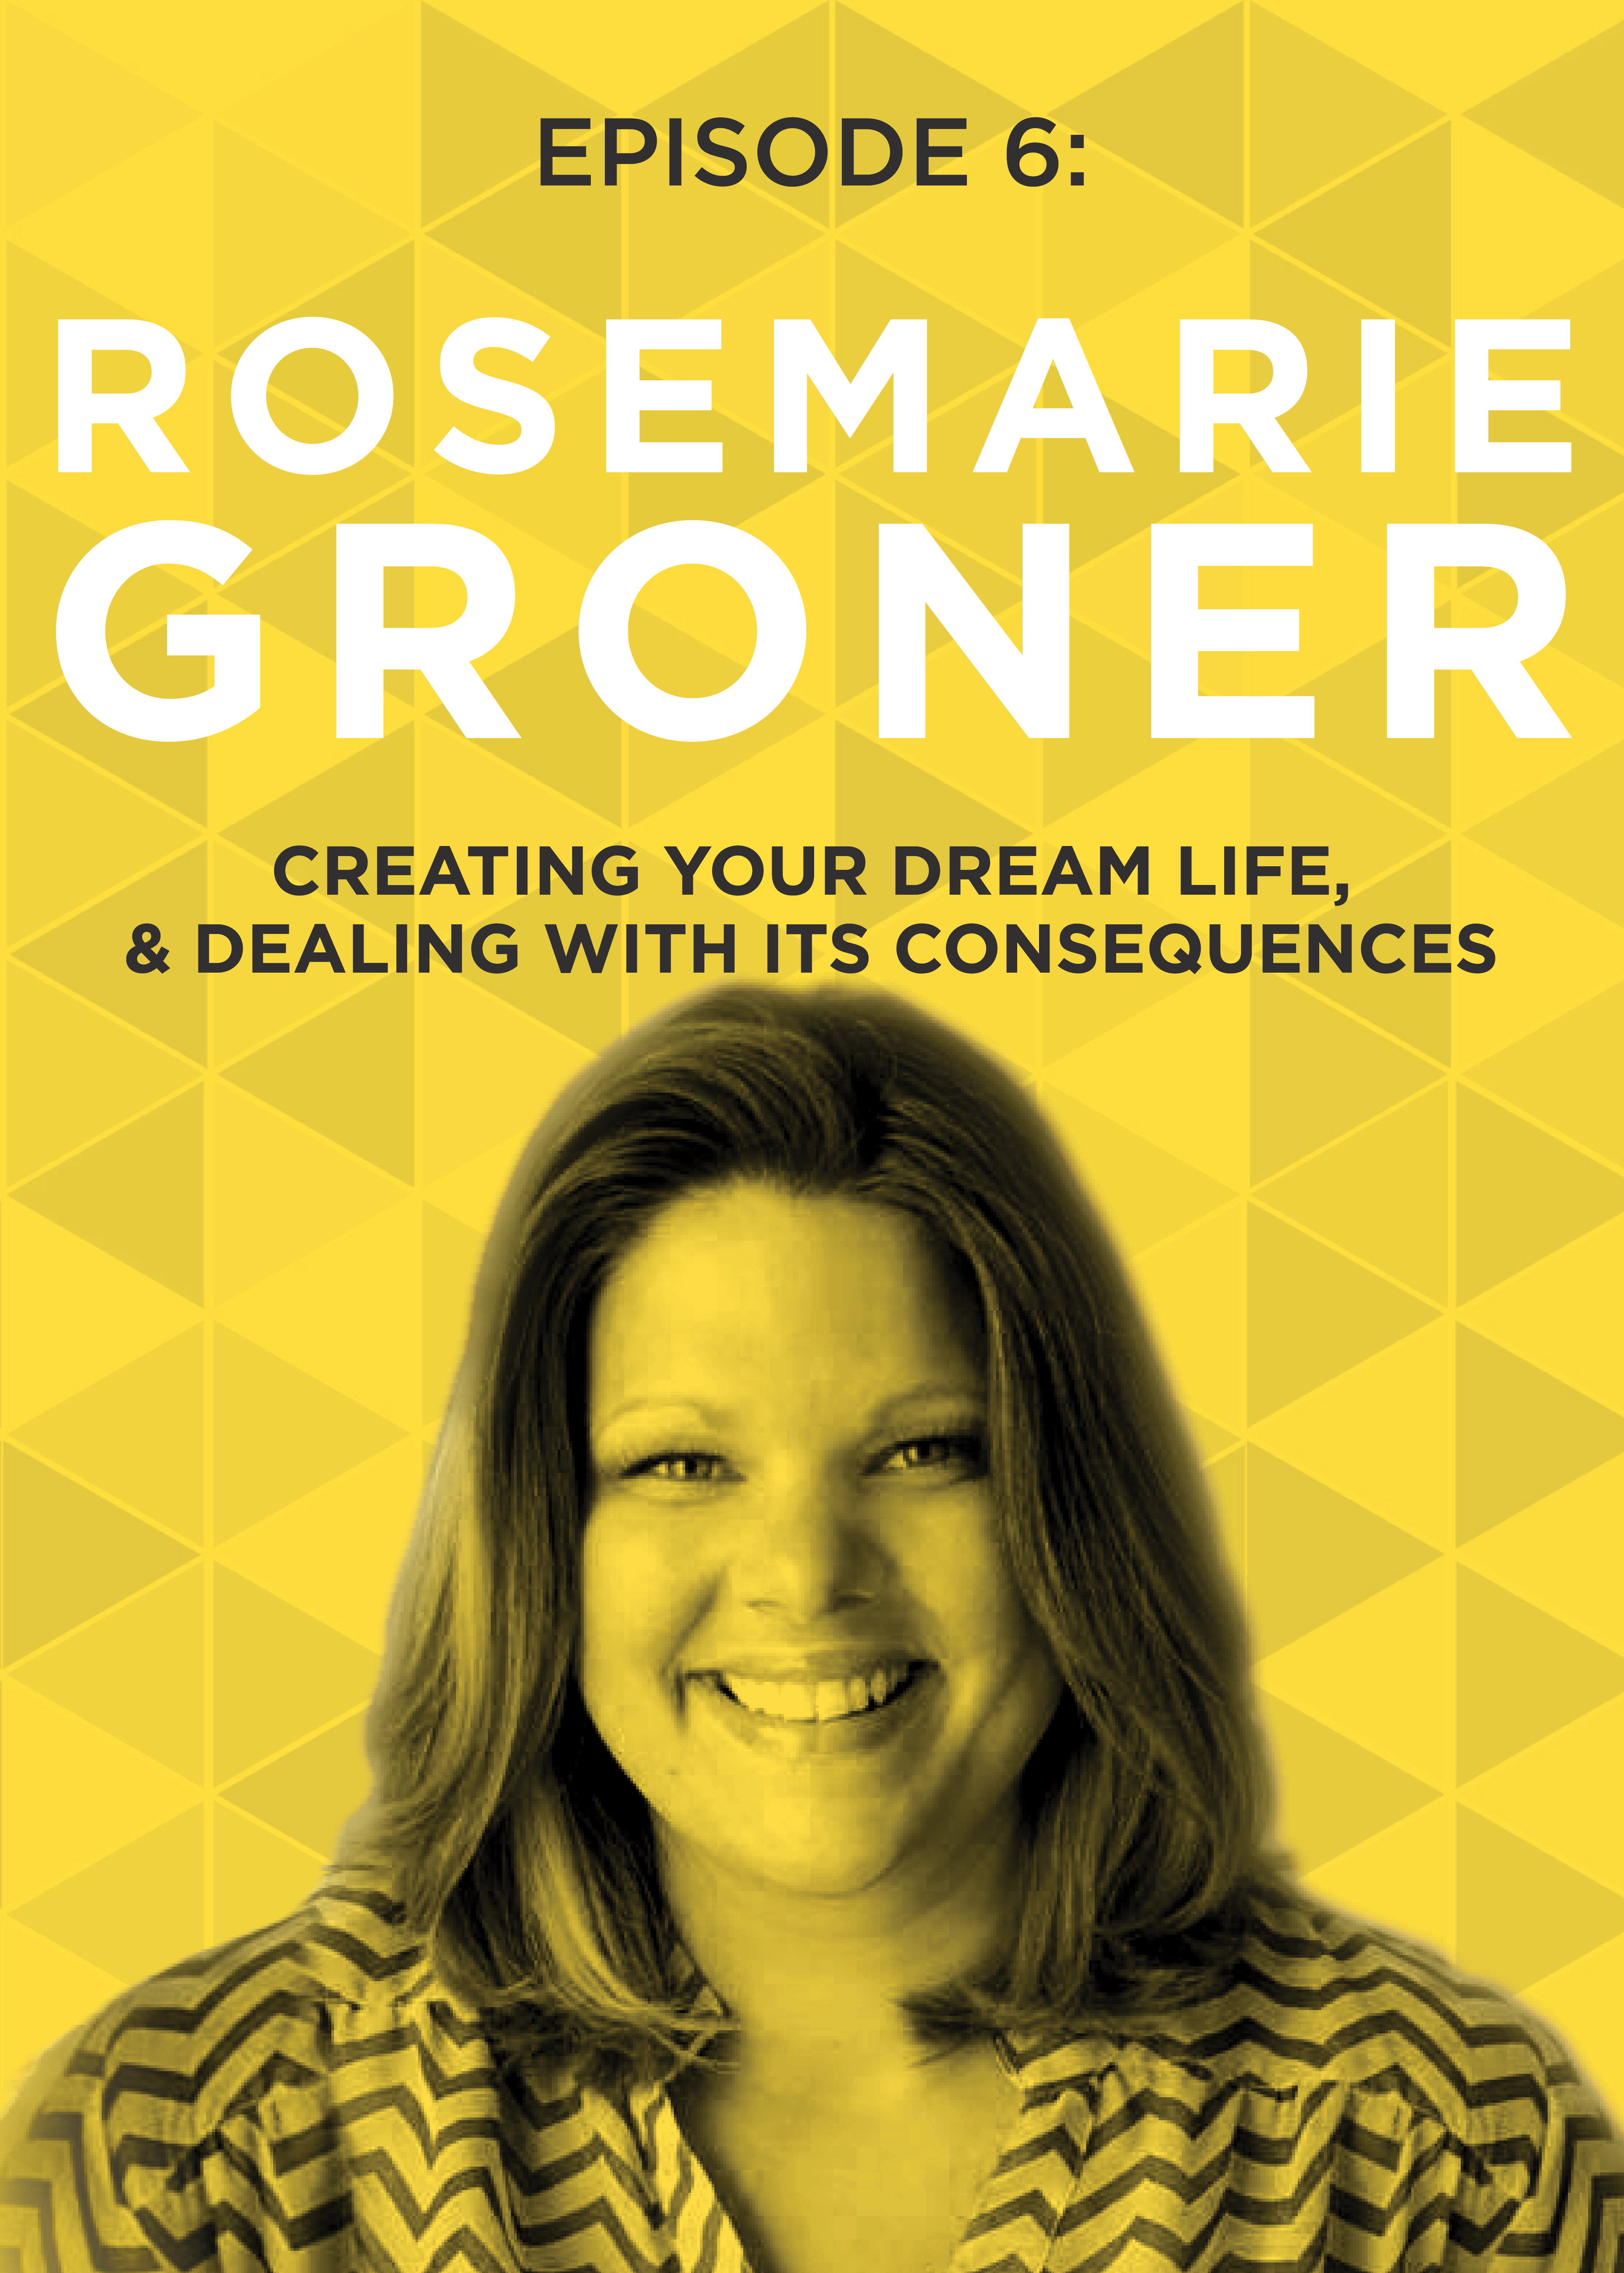 Creating Your Dream Life, & Dealing With its Consequences with Rosemarie Groner | Do It Scared Podcast with Ruth Soukup | KeepCreating Your Dream Life, & Dealing With its Consequences with Rosemarie Groner | Do It Scared Podcast with Ruth Soukup | Keep moving forward moving forward